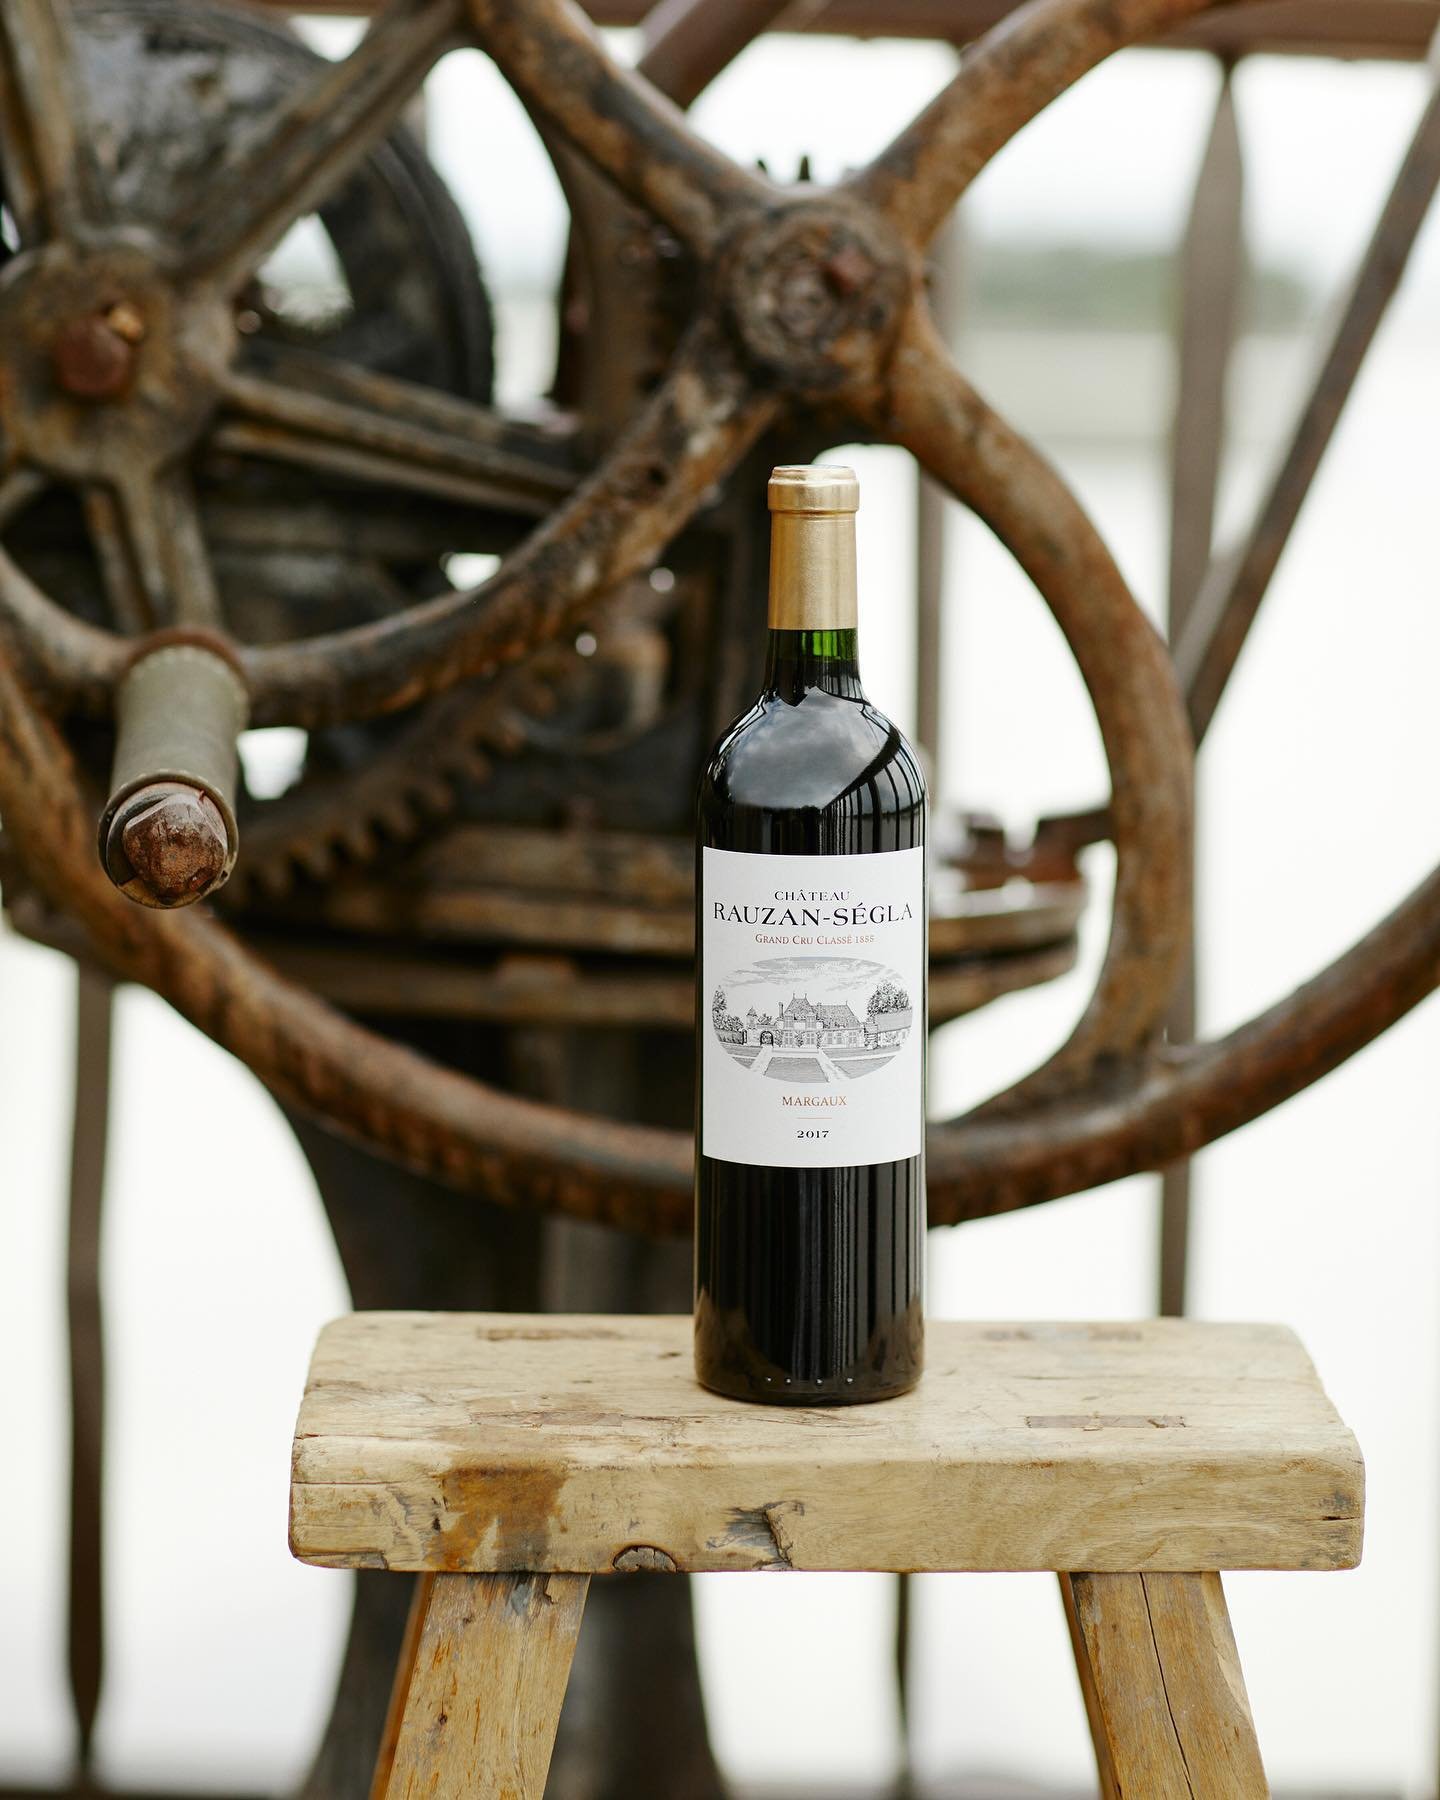 Discover the elegance of 2017 @chateaurauzansegla Margaux. 🍷 With fleshy red fruits, firm tannins, and vibrant blueberry notes, this floral and sophisticated wine is a true delight for the senses. 

Ready to enjoy now and with even more refinement t